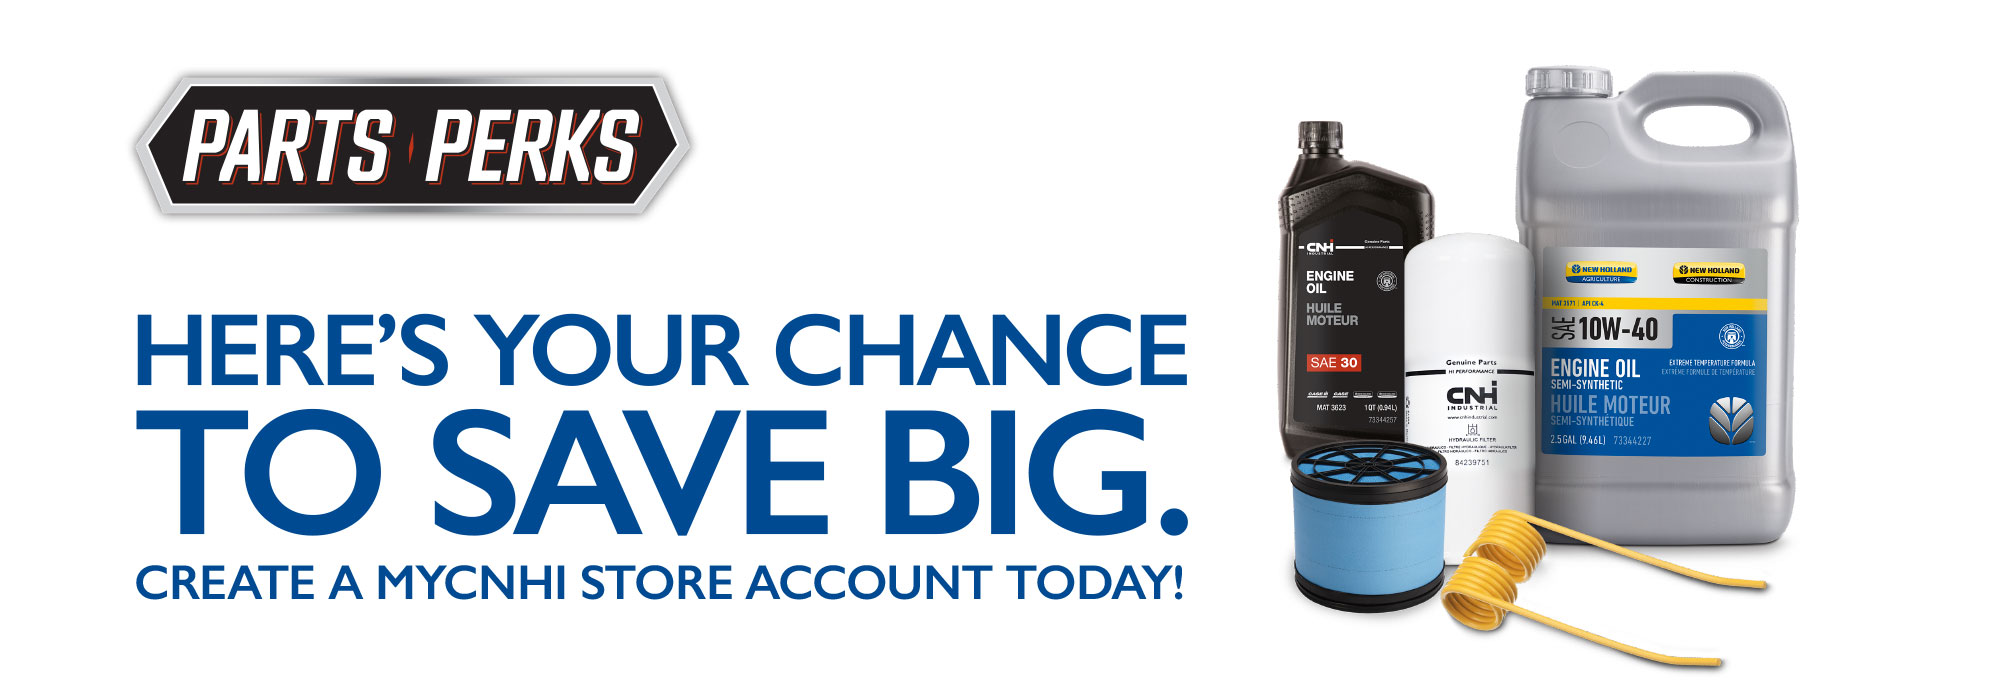 Parts Perks | DON'T MISS OUT ON BIG SAVINGS. CREATE A MYCNHI STORE  ACCOUNT TODAY!